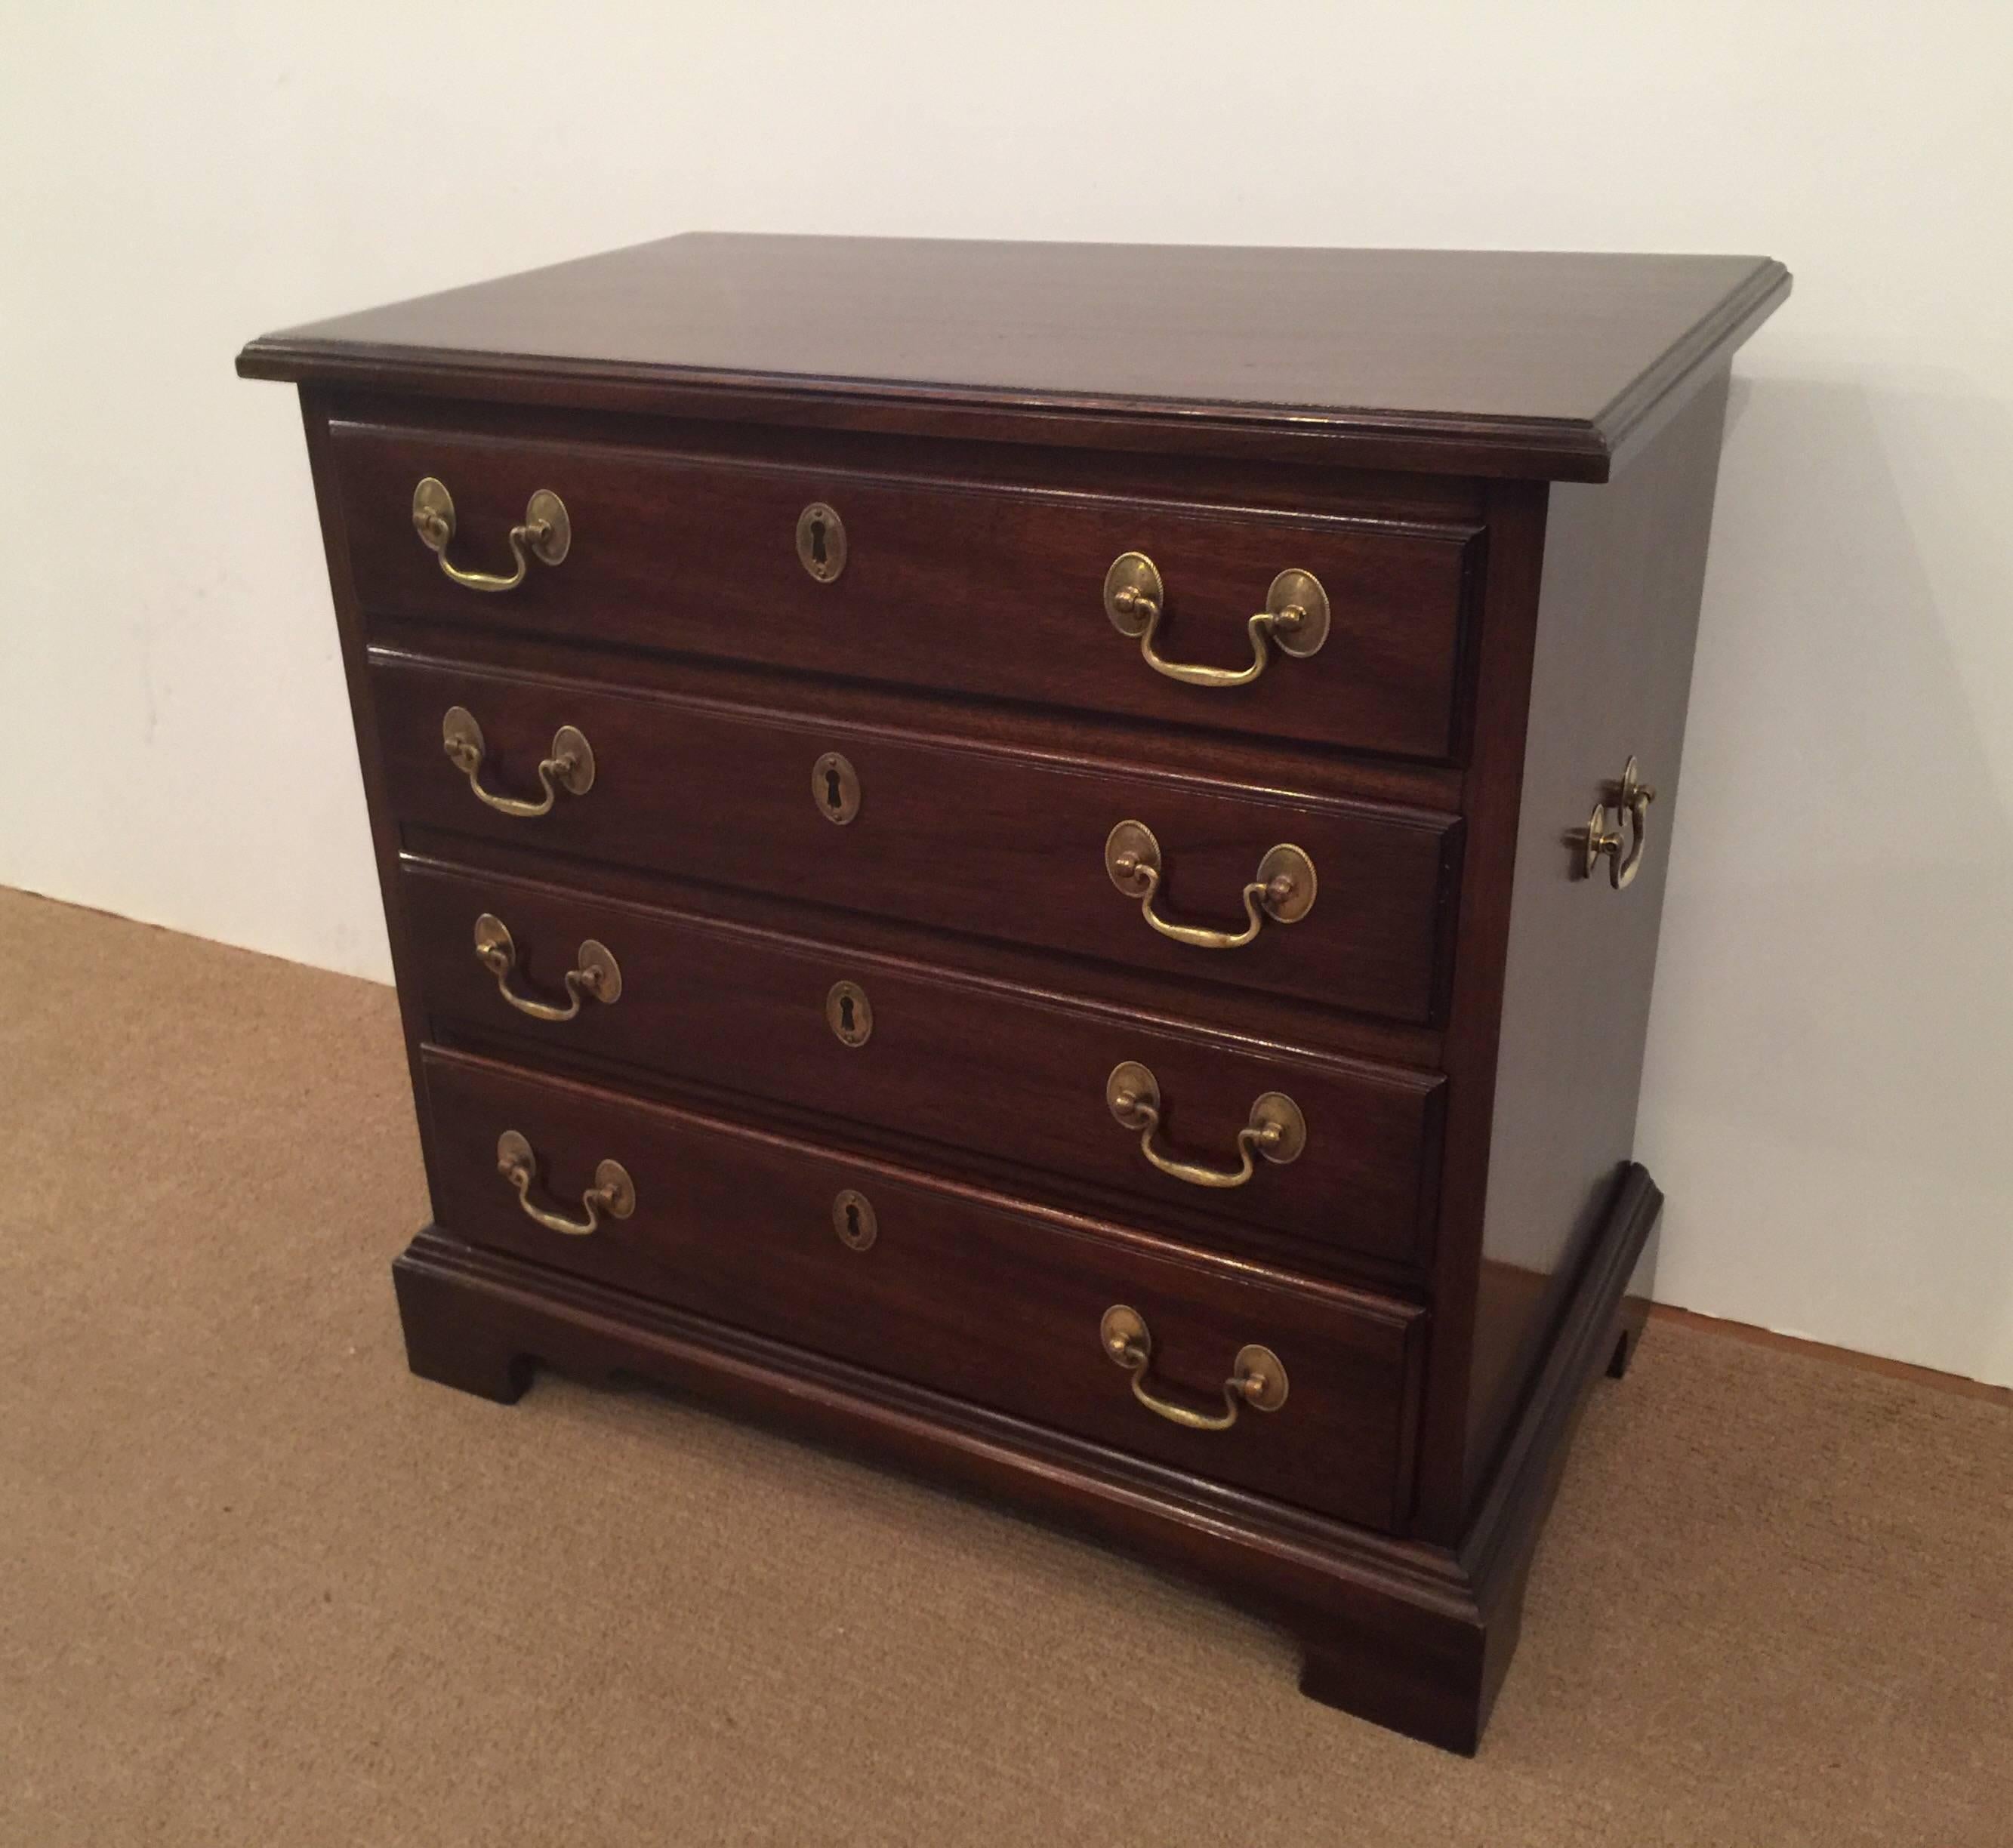 Nice Henkel-Harris mahogany diminutive bachelors chest with brass pulls. Total of four drawers.